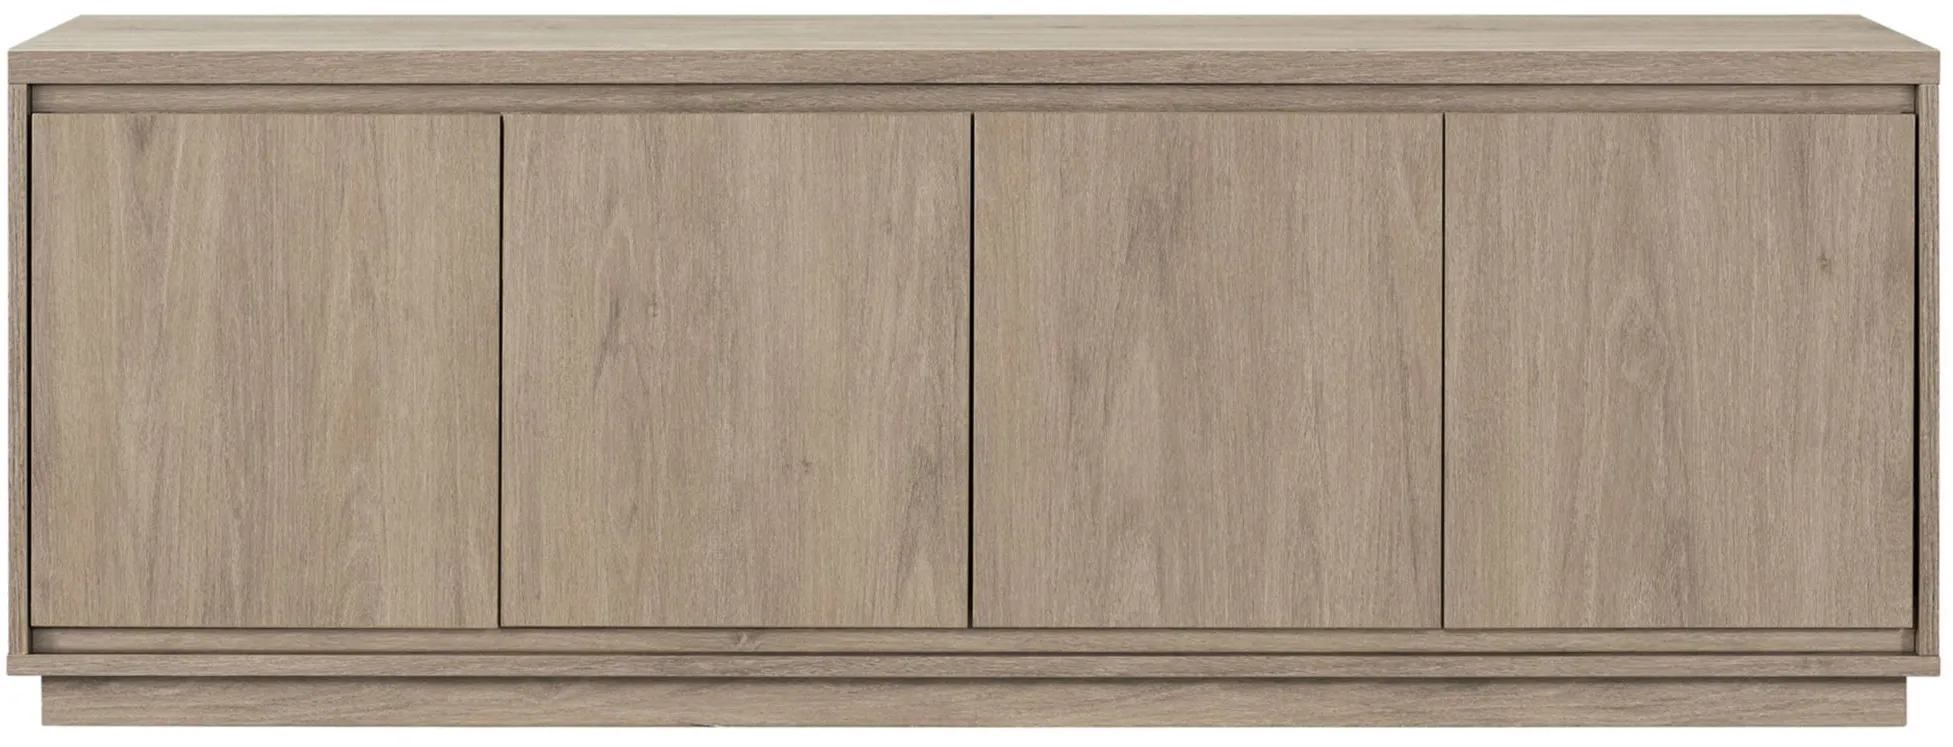 Presque TV Stand in Antiqued Gray Oak by Hudson & Canal